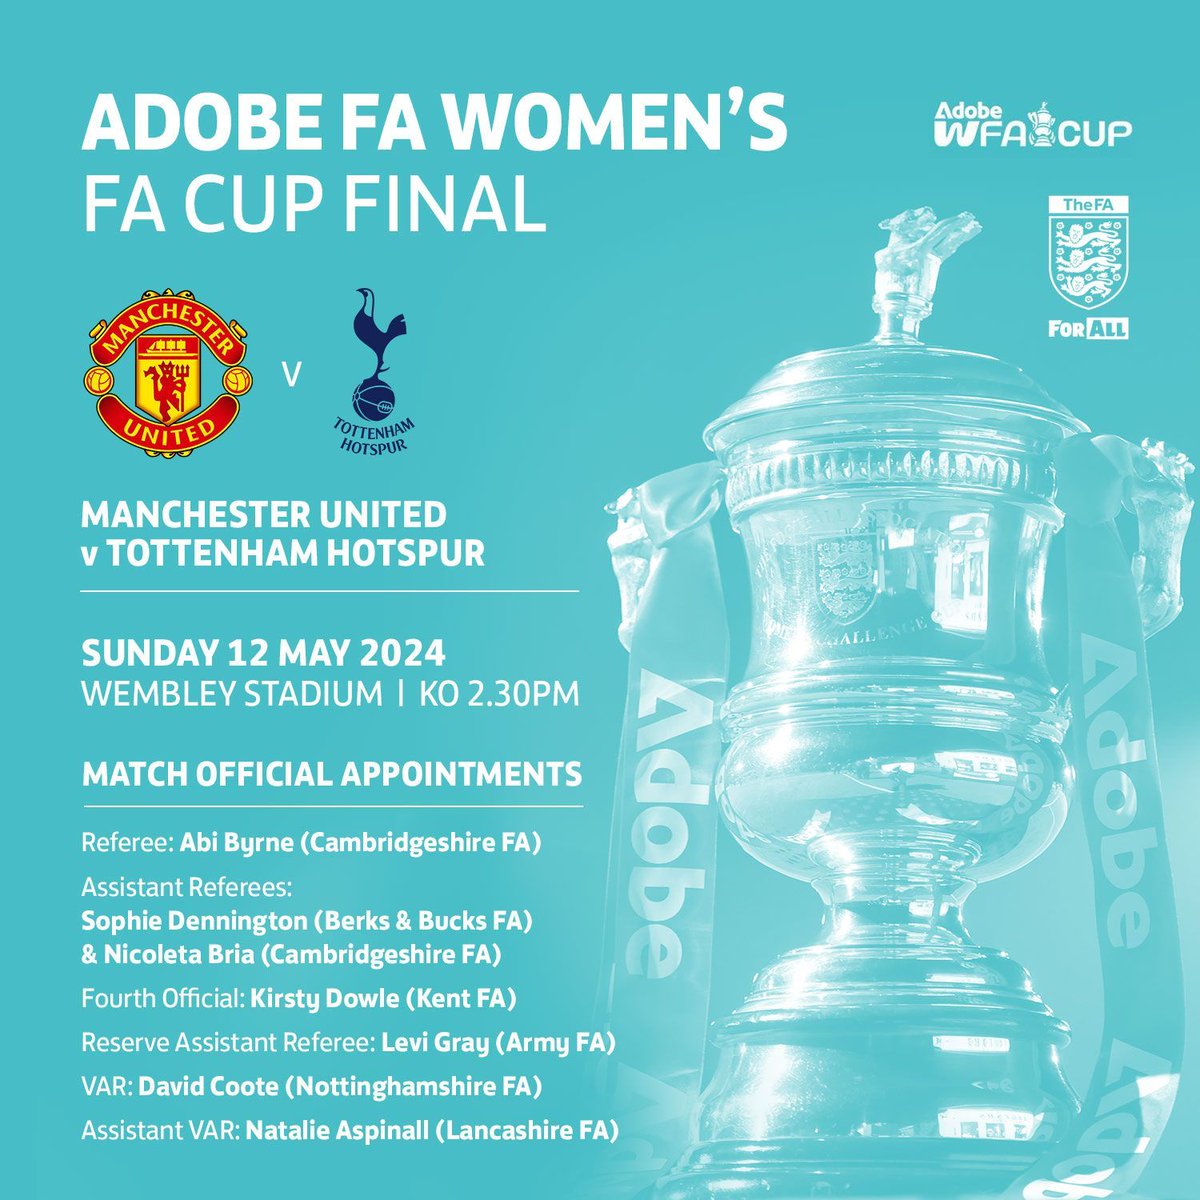 A special day for our team of match officials at #Wembley for the @AdobeWFACup today! 🏆 Enjoy your day in front of a sold out crowd under the arch - it'll be an experience you'll never forget! 🏟️ #AdobeWomensFACup